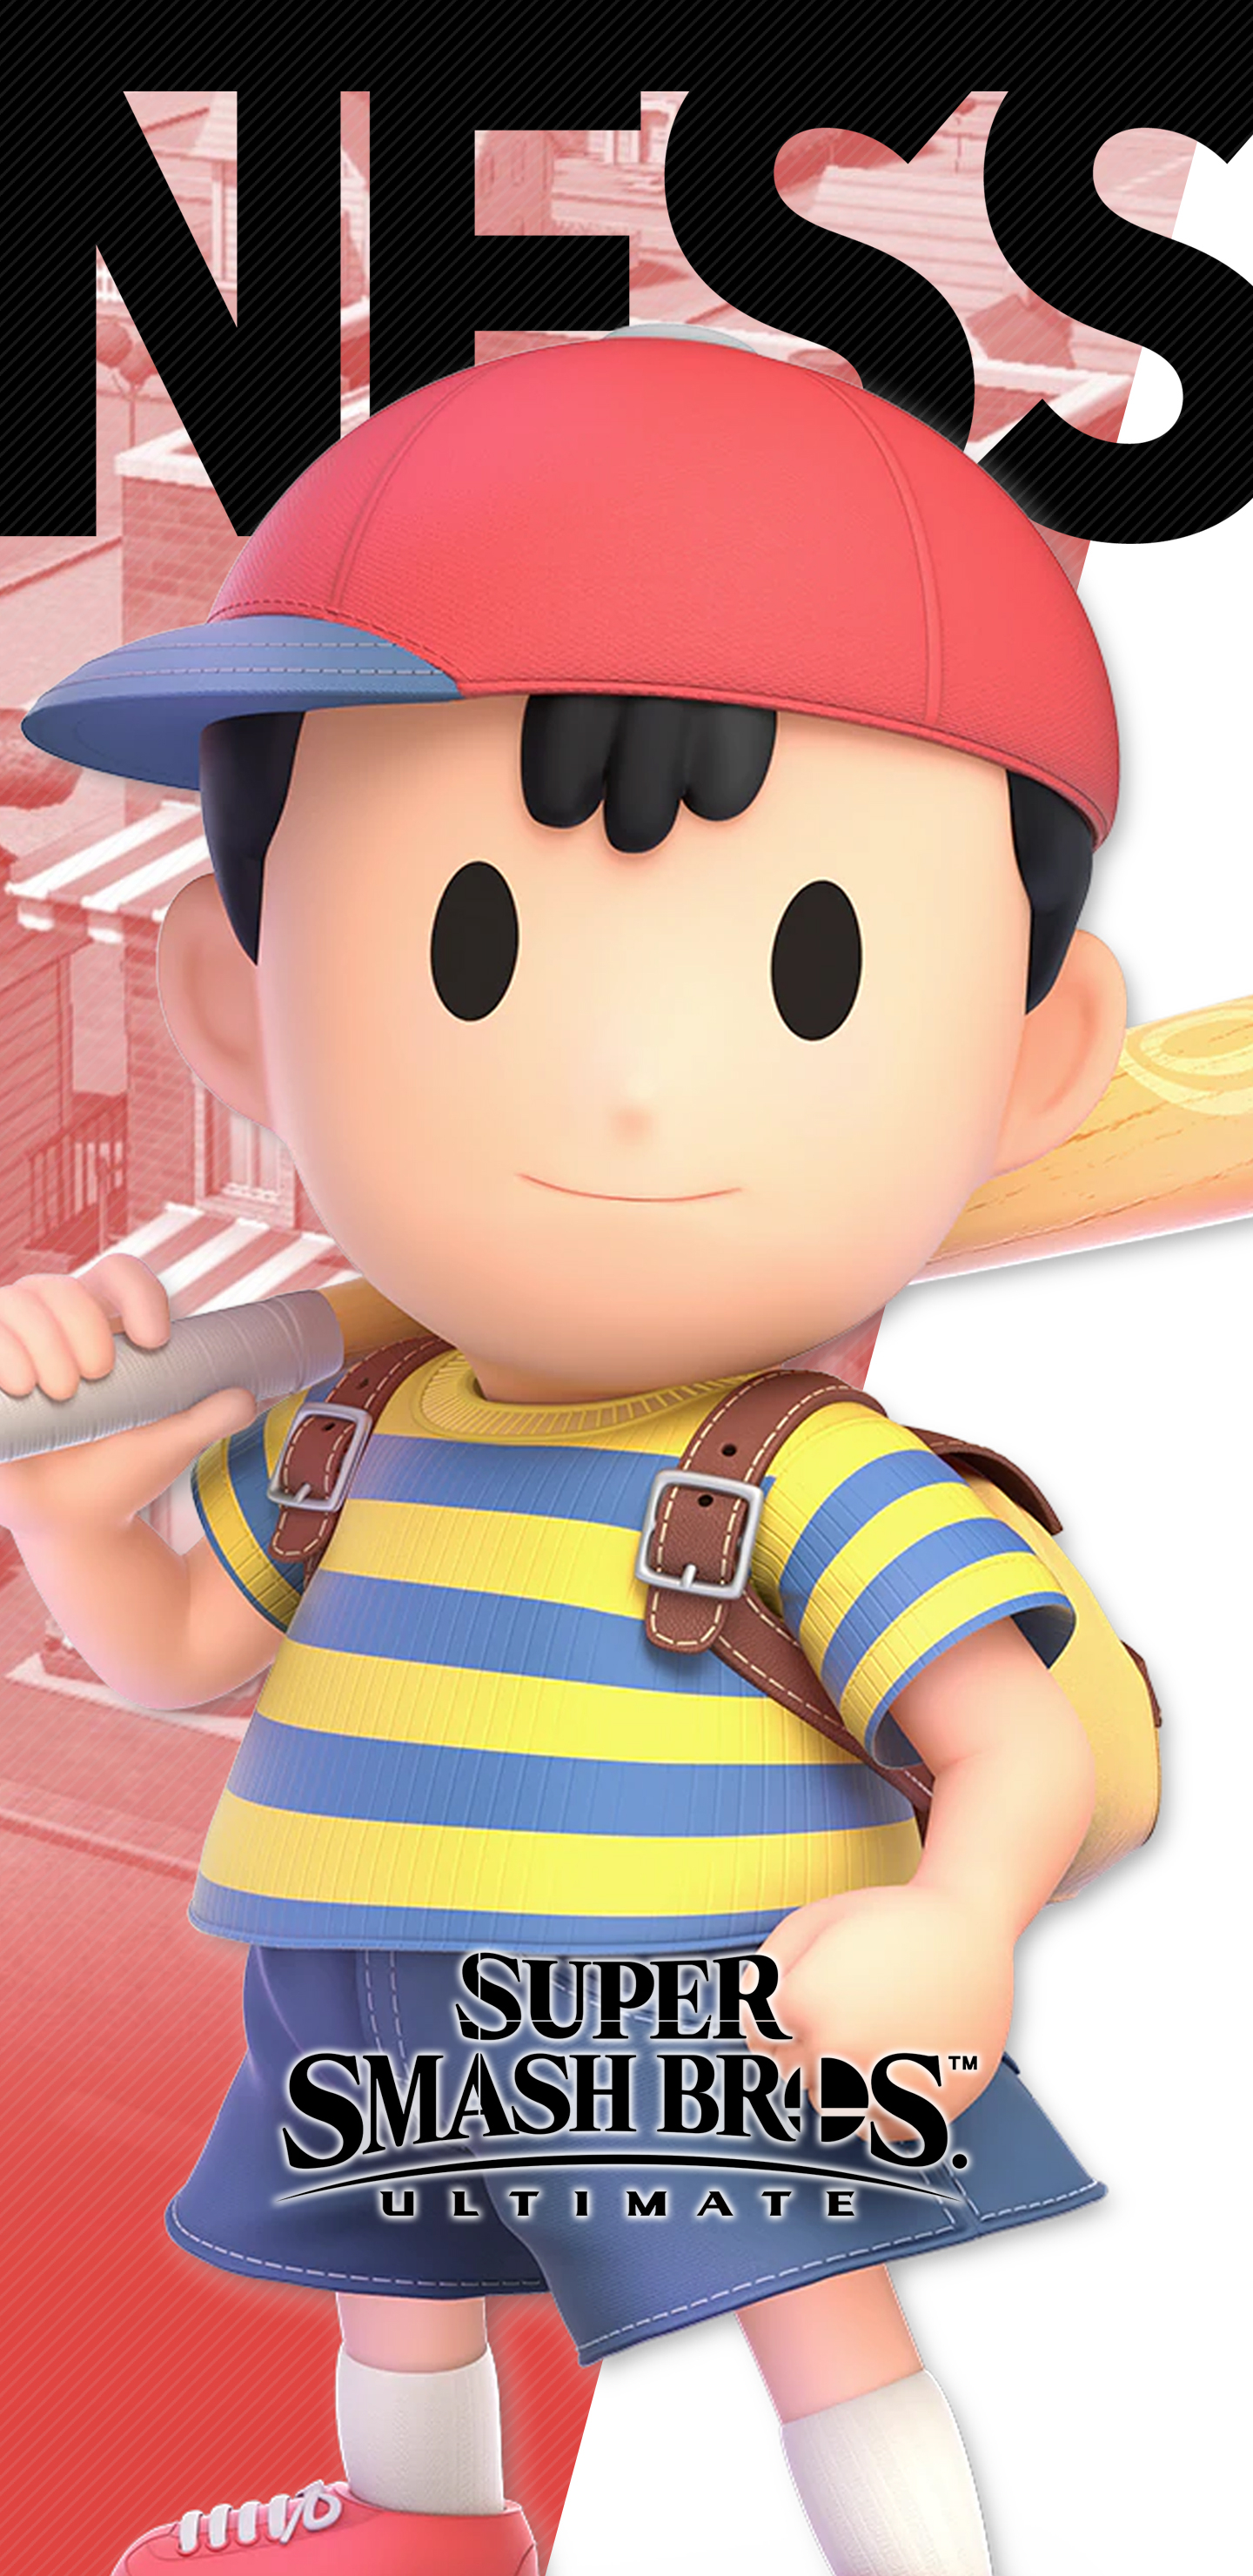 1440x2960 Super Smash Bros Ultimate Ness Wallpapers Cat with Monocle